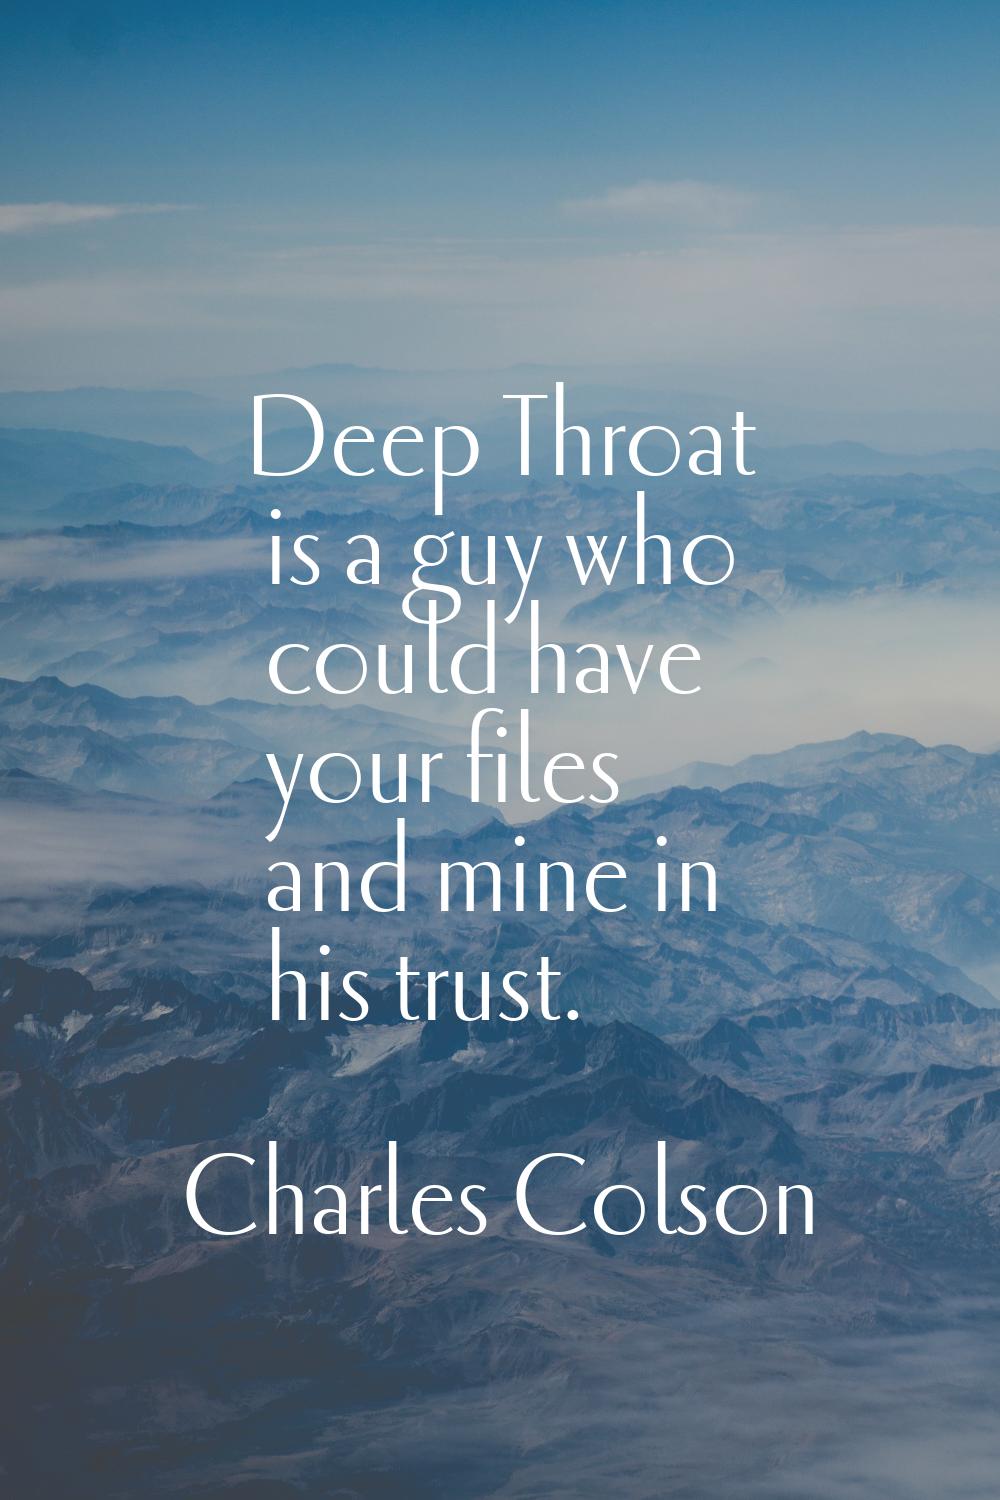 Deep Throat is a guy who could have your files and mine in his trust.